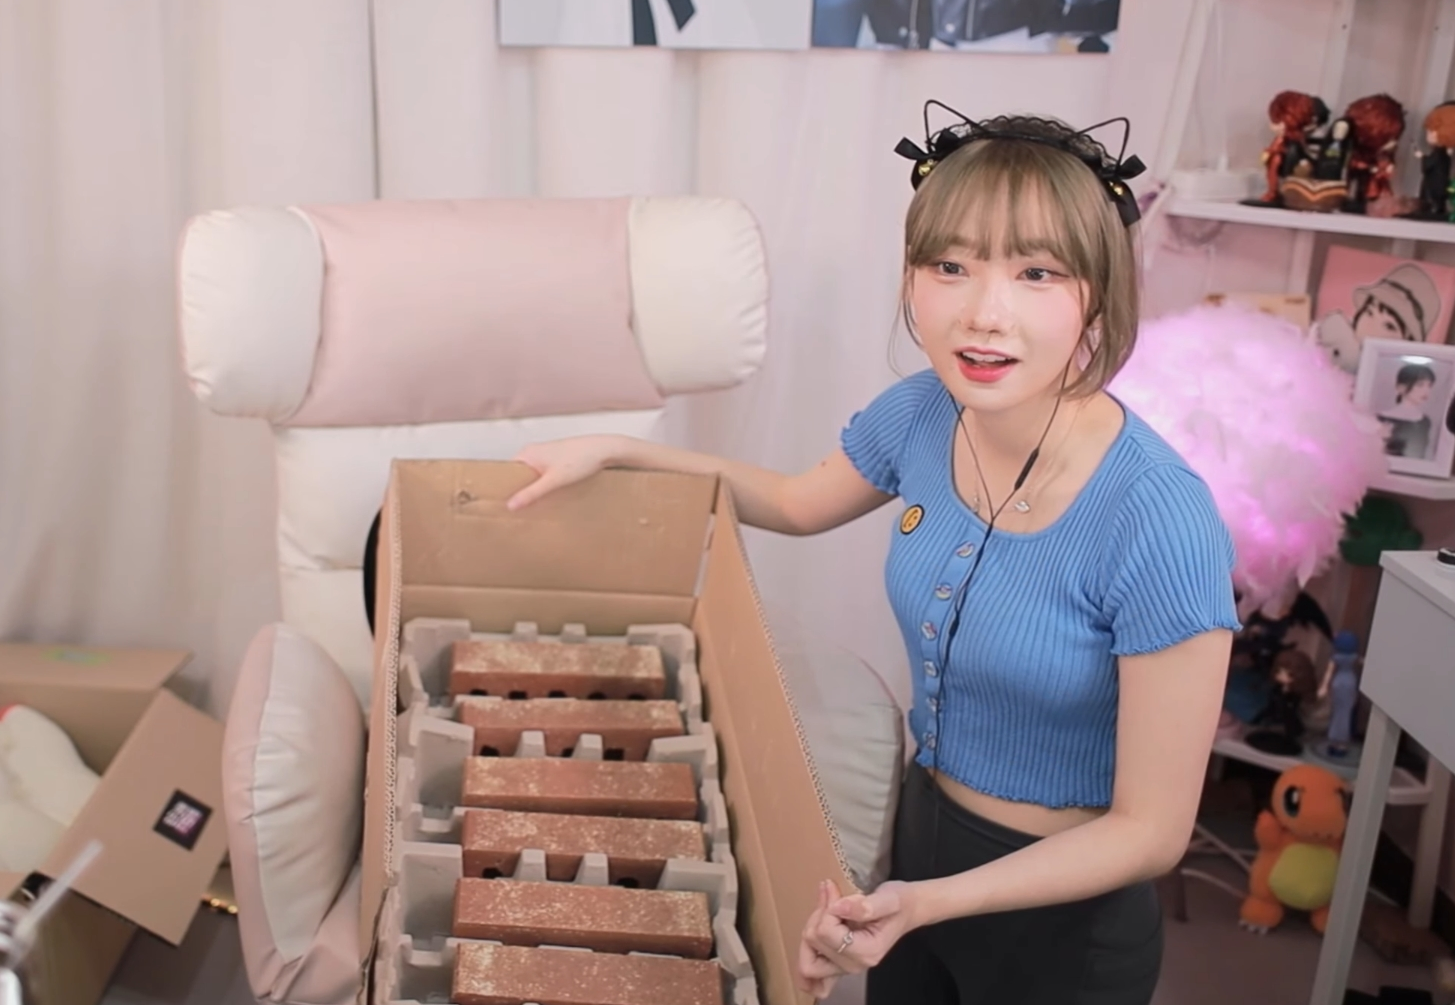 A female streamer who received a real idol as a gift from the viewers.